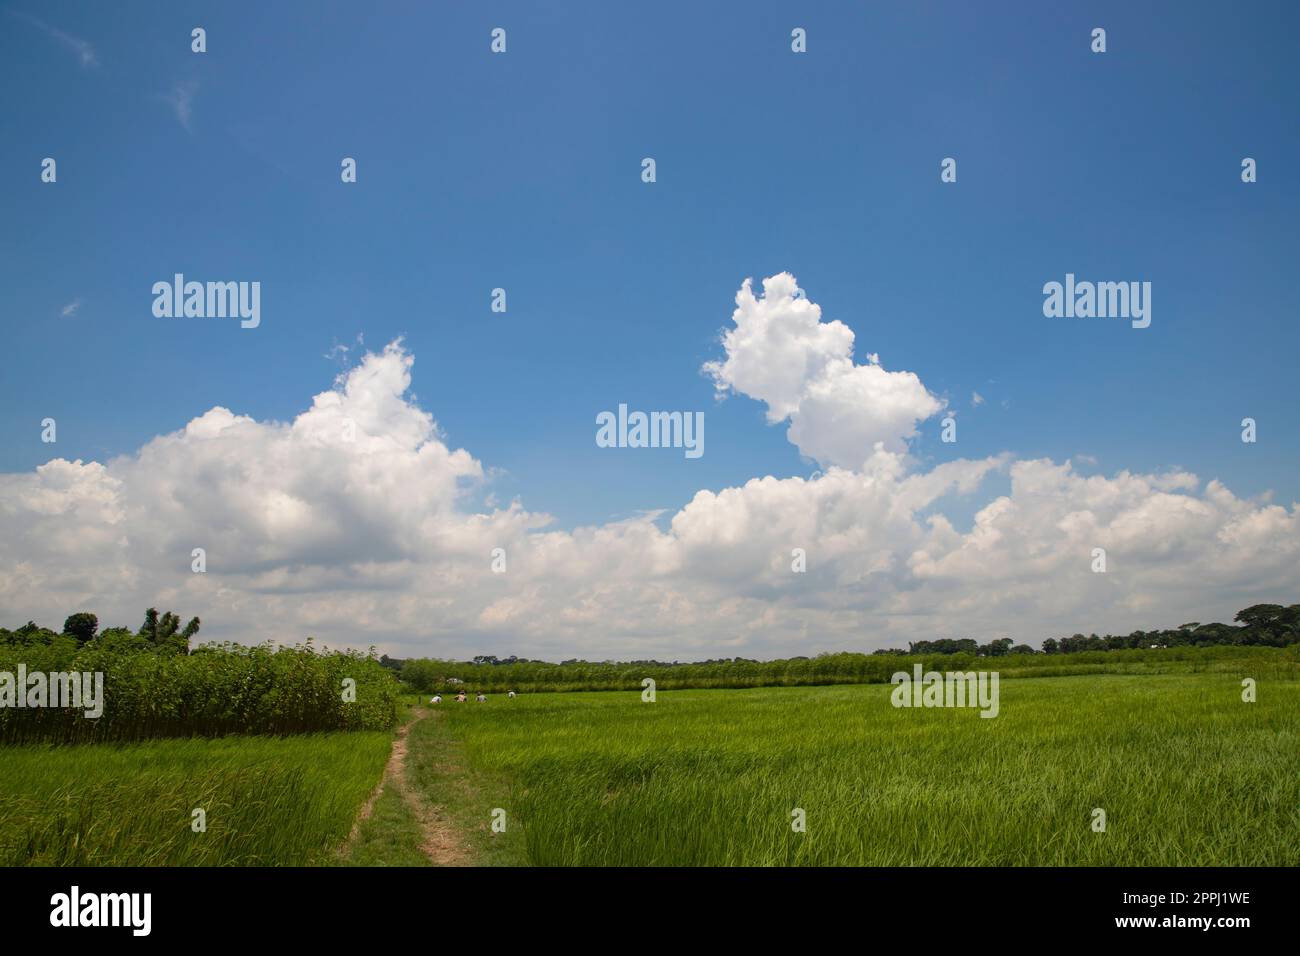 Beautiful Green rice fields  with contrasting  Cloudy skies Stock Photo